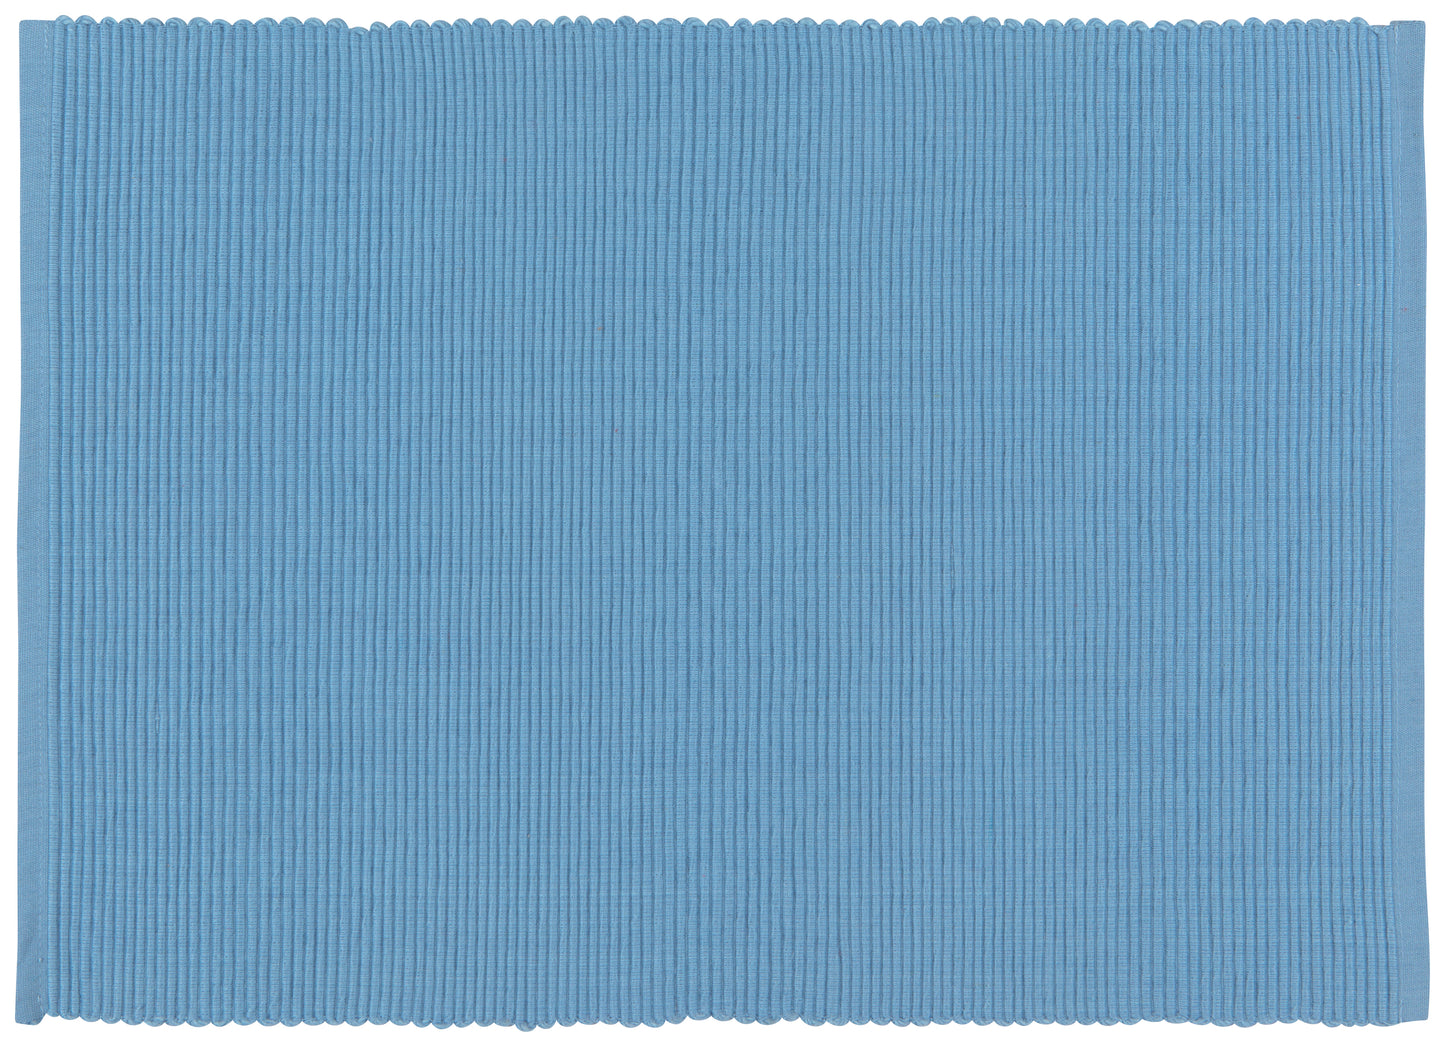 Spectrum French Blue Placemat Set of 2